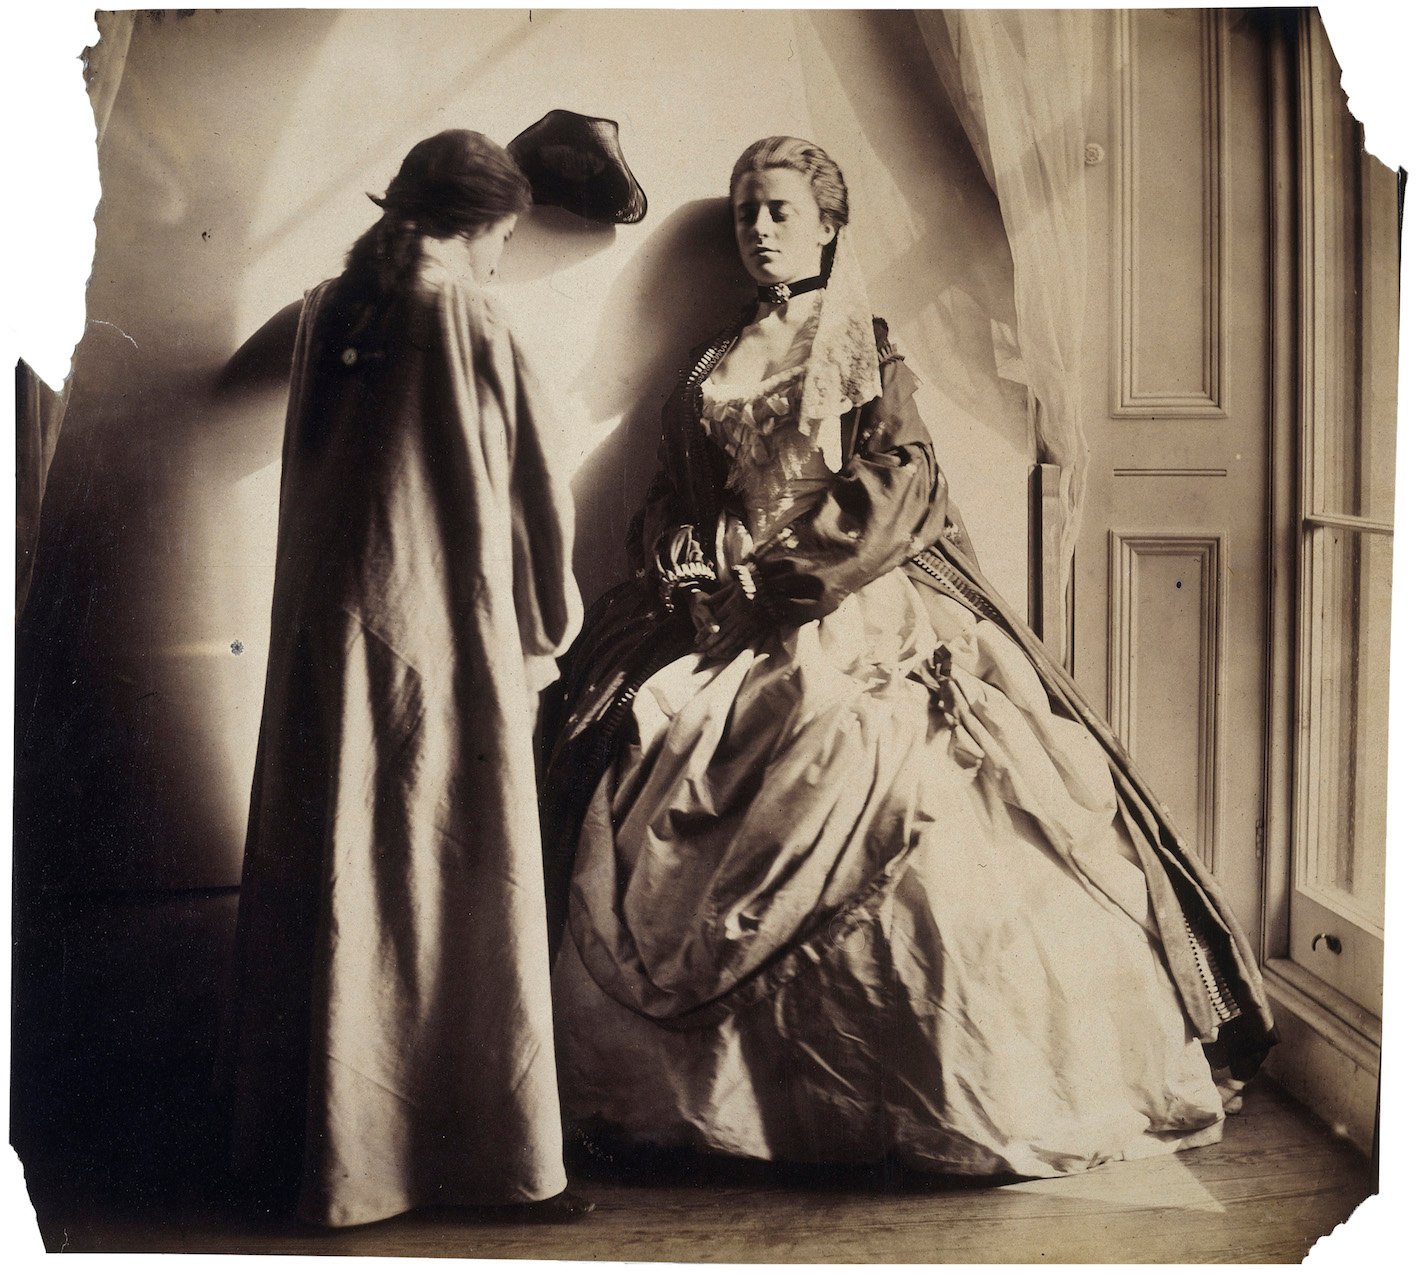 Photographic Study (Clementina and Isabella Grace Maude) by Clementina Hawarden, 1863-4. Copyright National Portrait Gallery